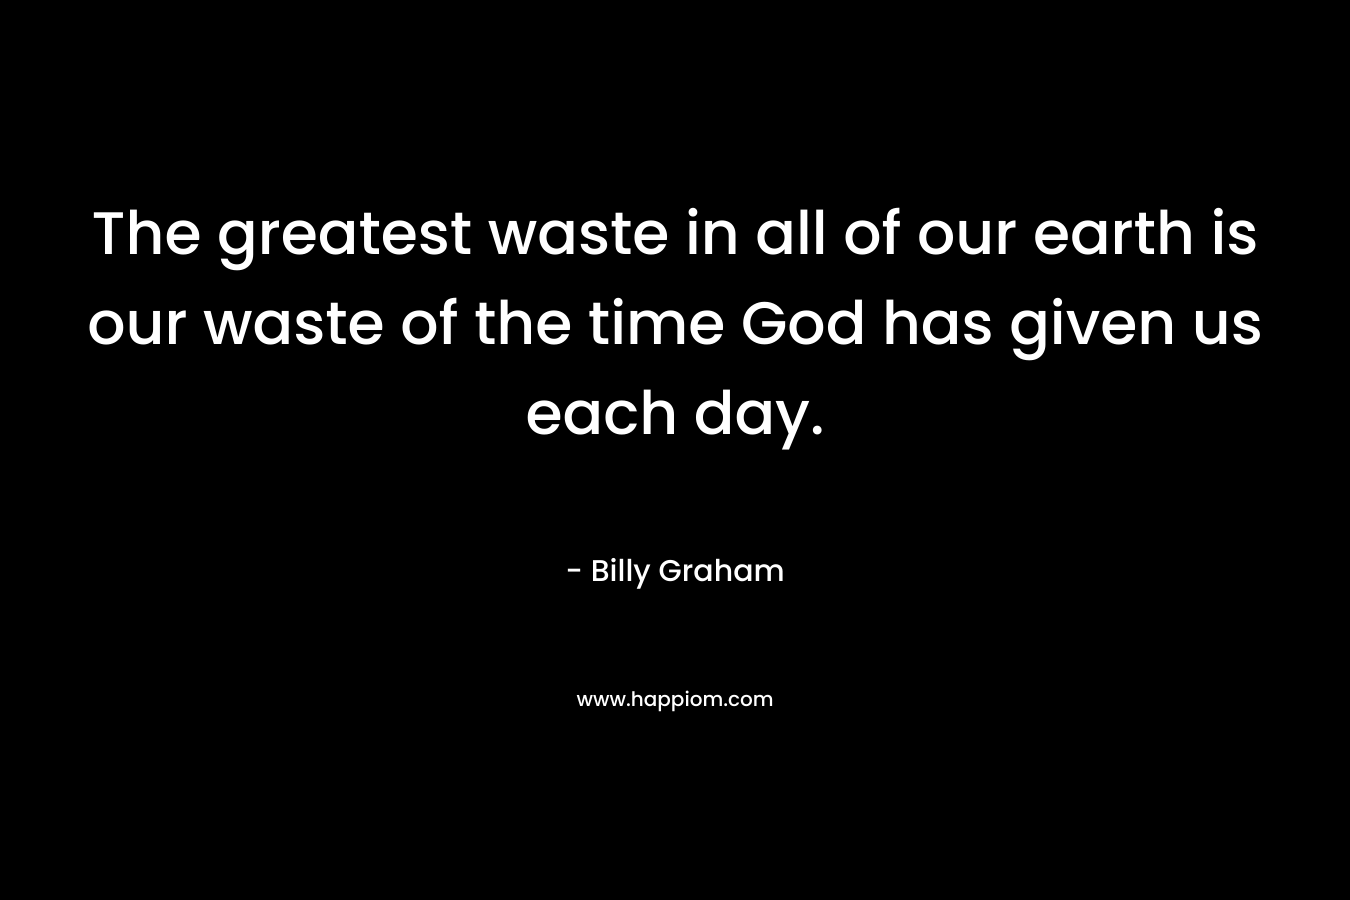 The greatest waste in all of our earth is our waste of the time God has given us each day.